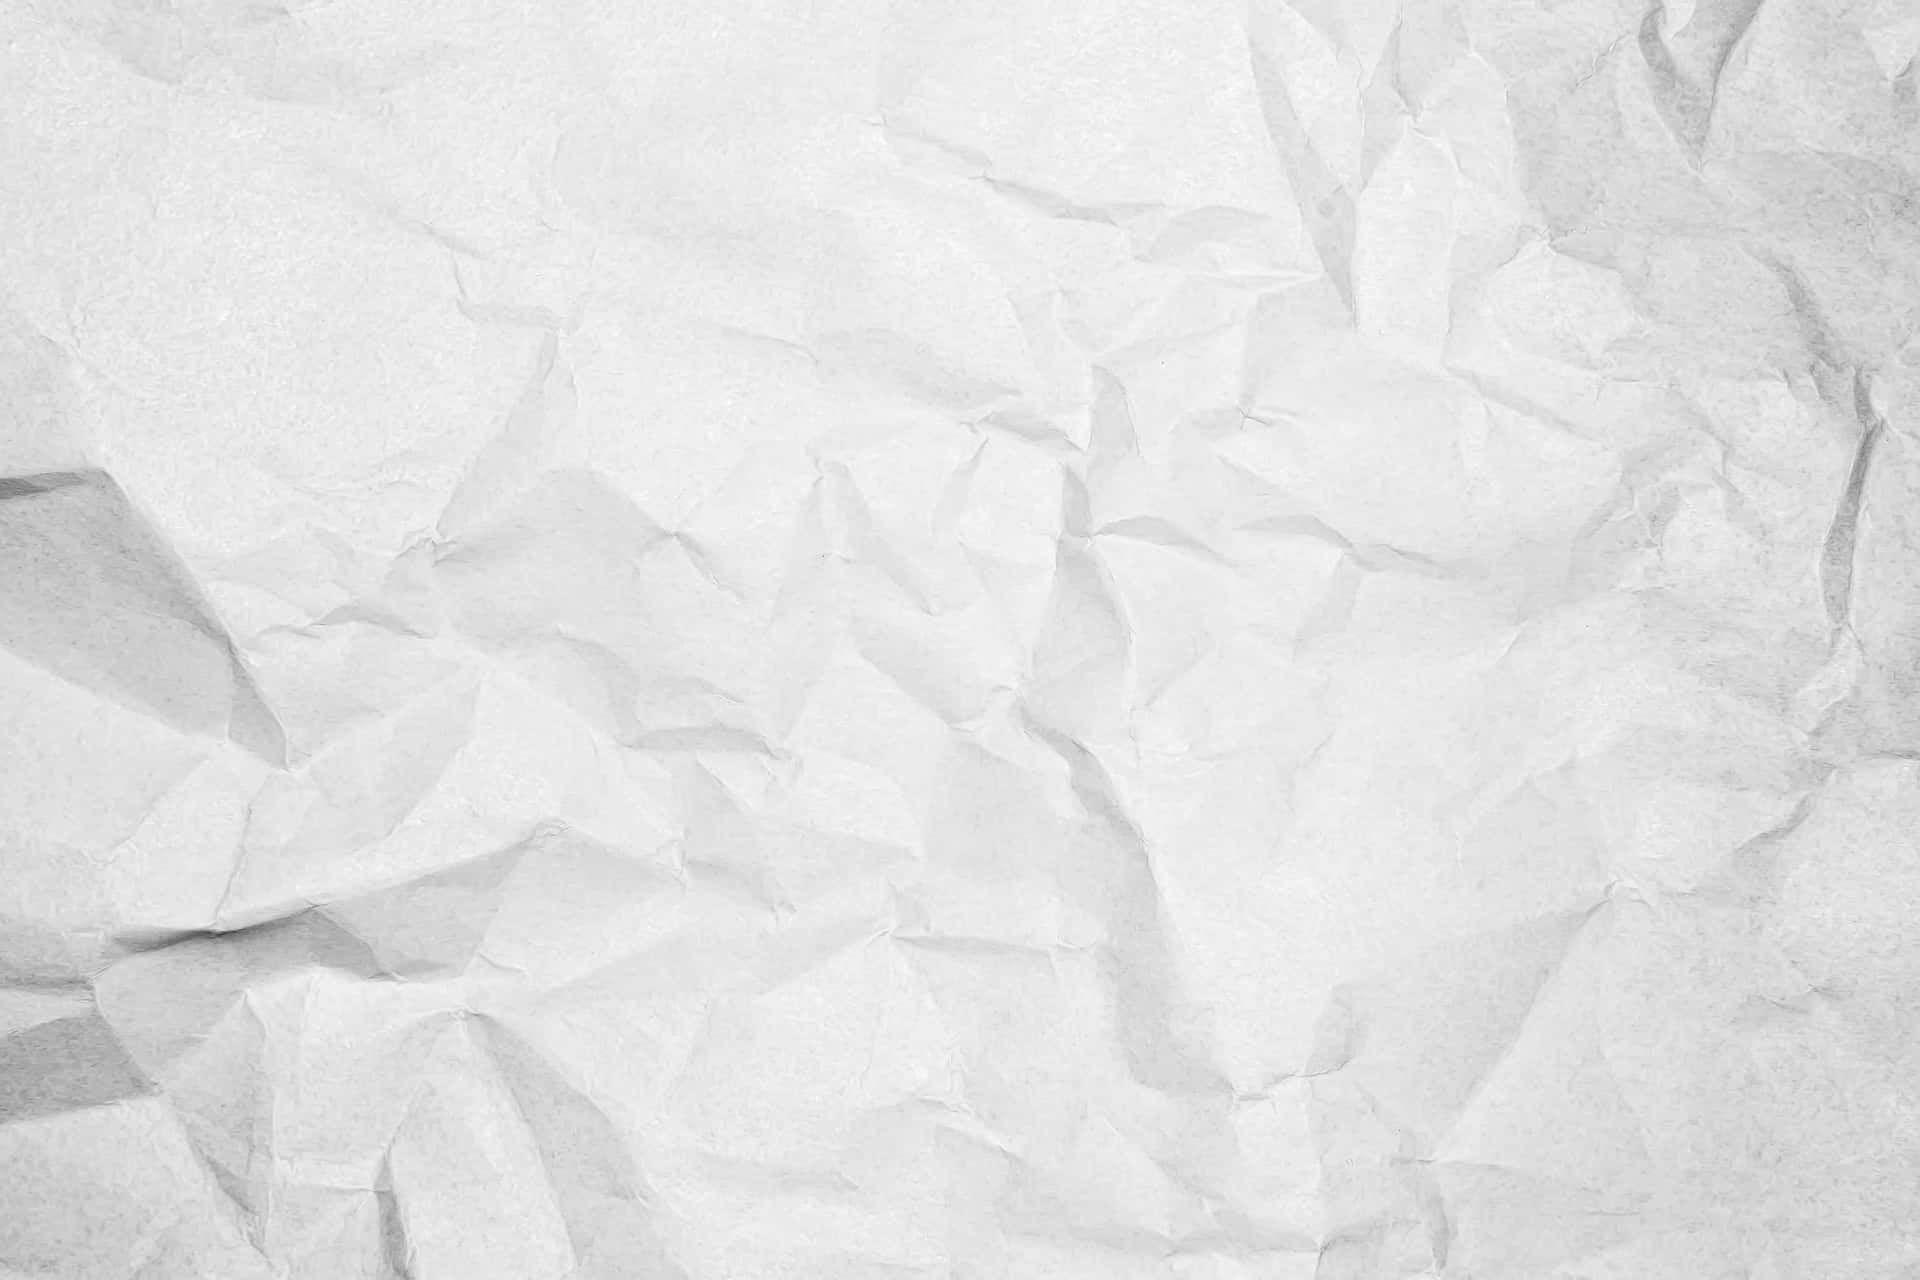 distressed paper texture